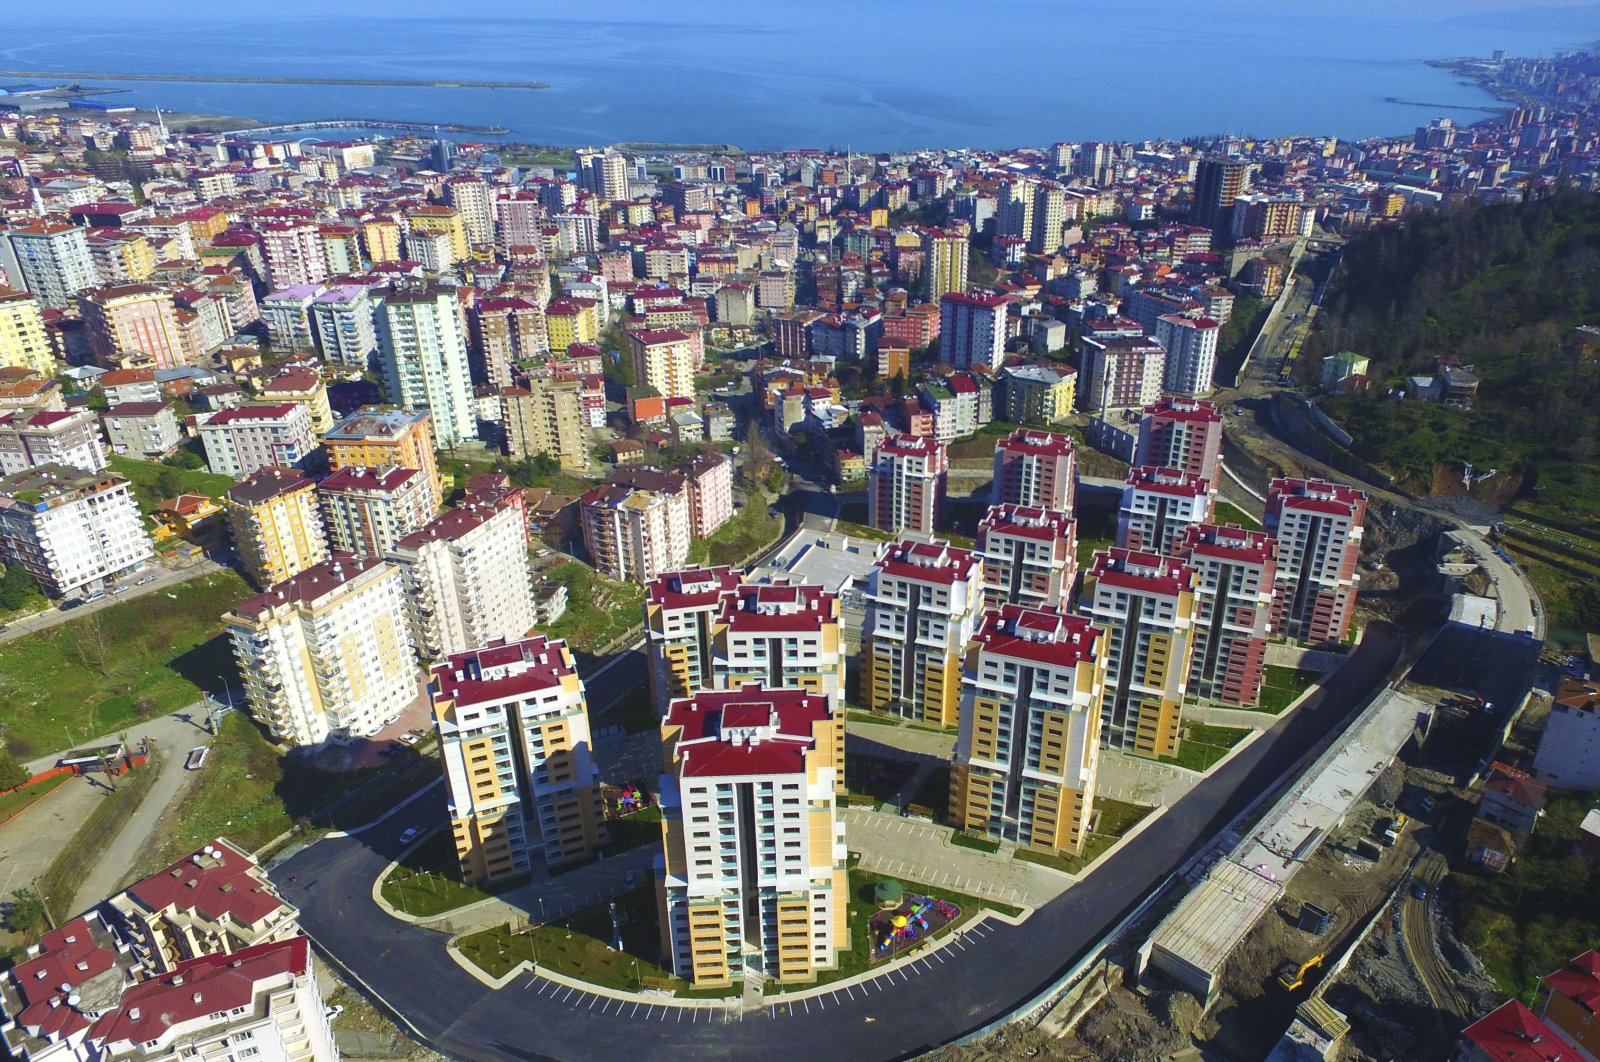 A new housing project is seen in northeastern Rize province, Turkey, Oct. 3, 2018. (IHA Photo)